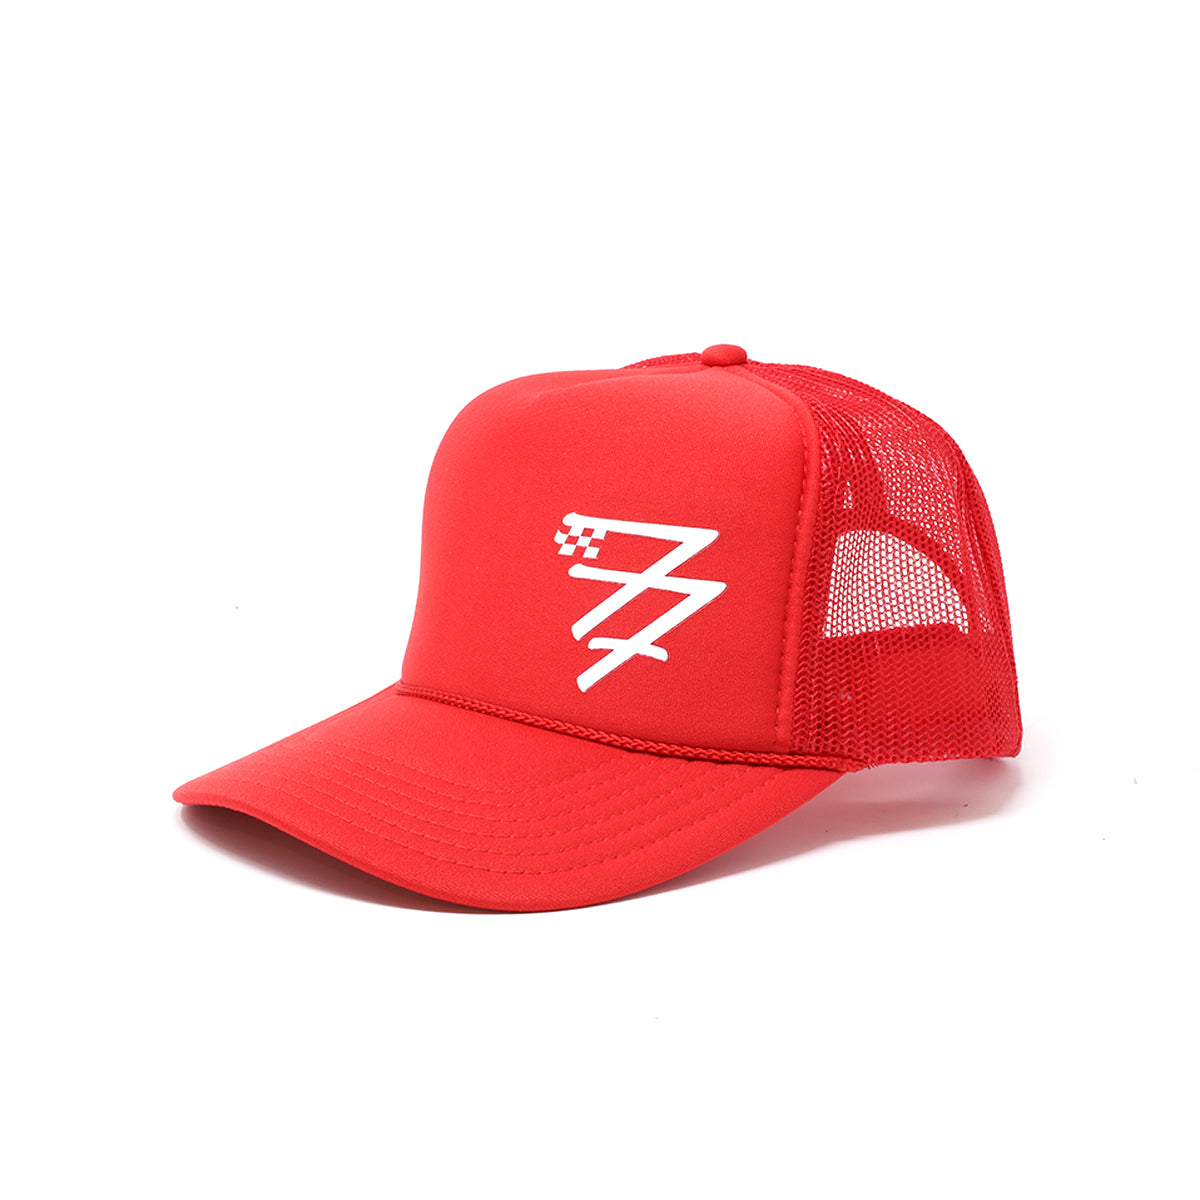 The "STAY FAST" Logo Snapback - Red